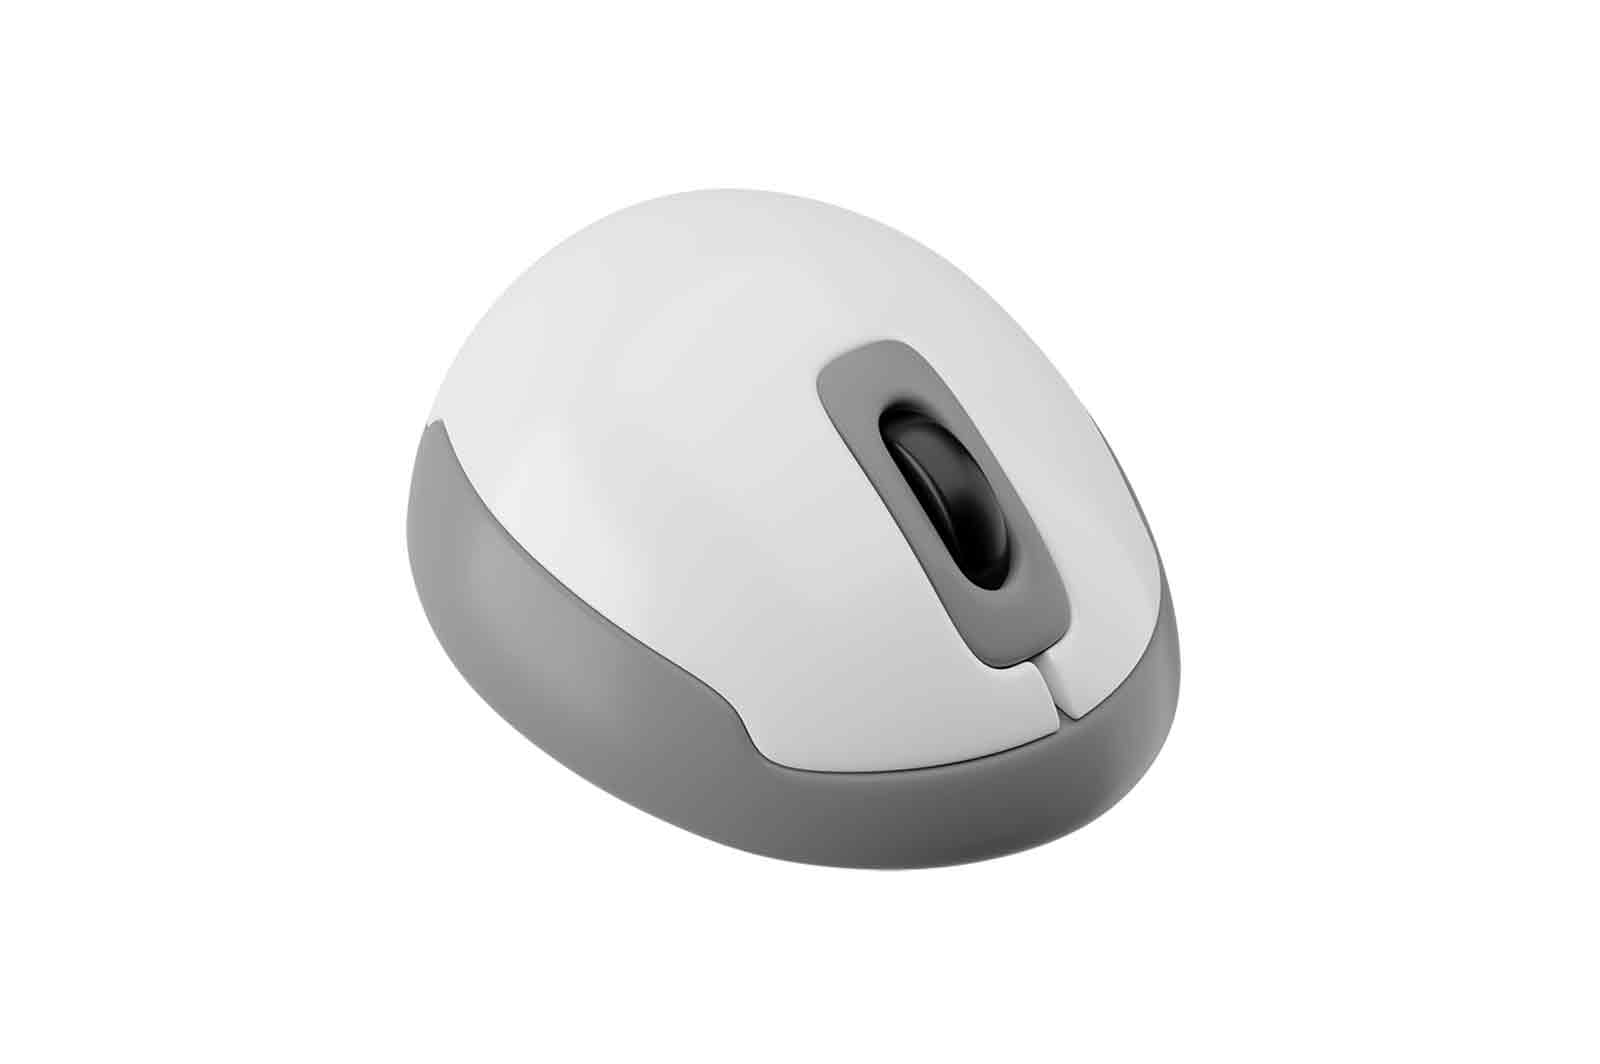 Wireless computer mouse, 3D rendered illustration. White and grey with black scroll wheel and two buttons.